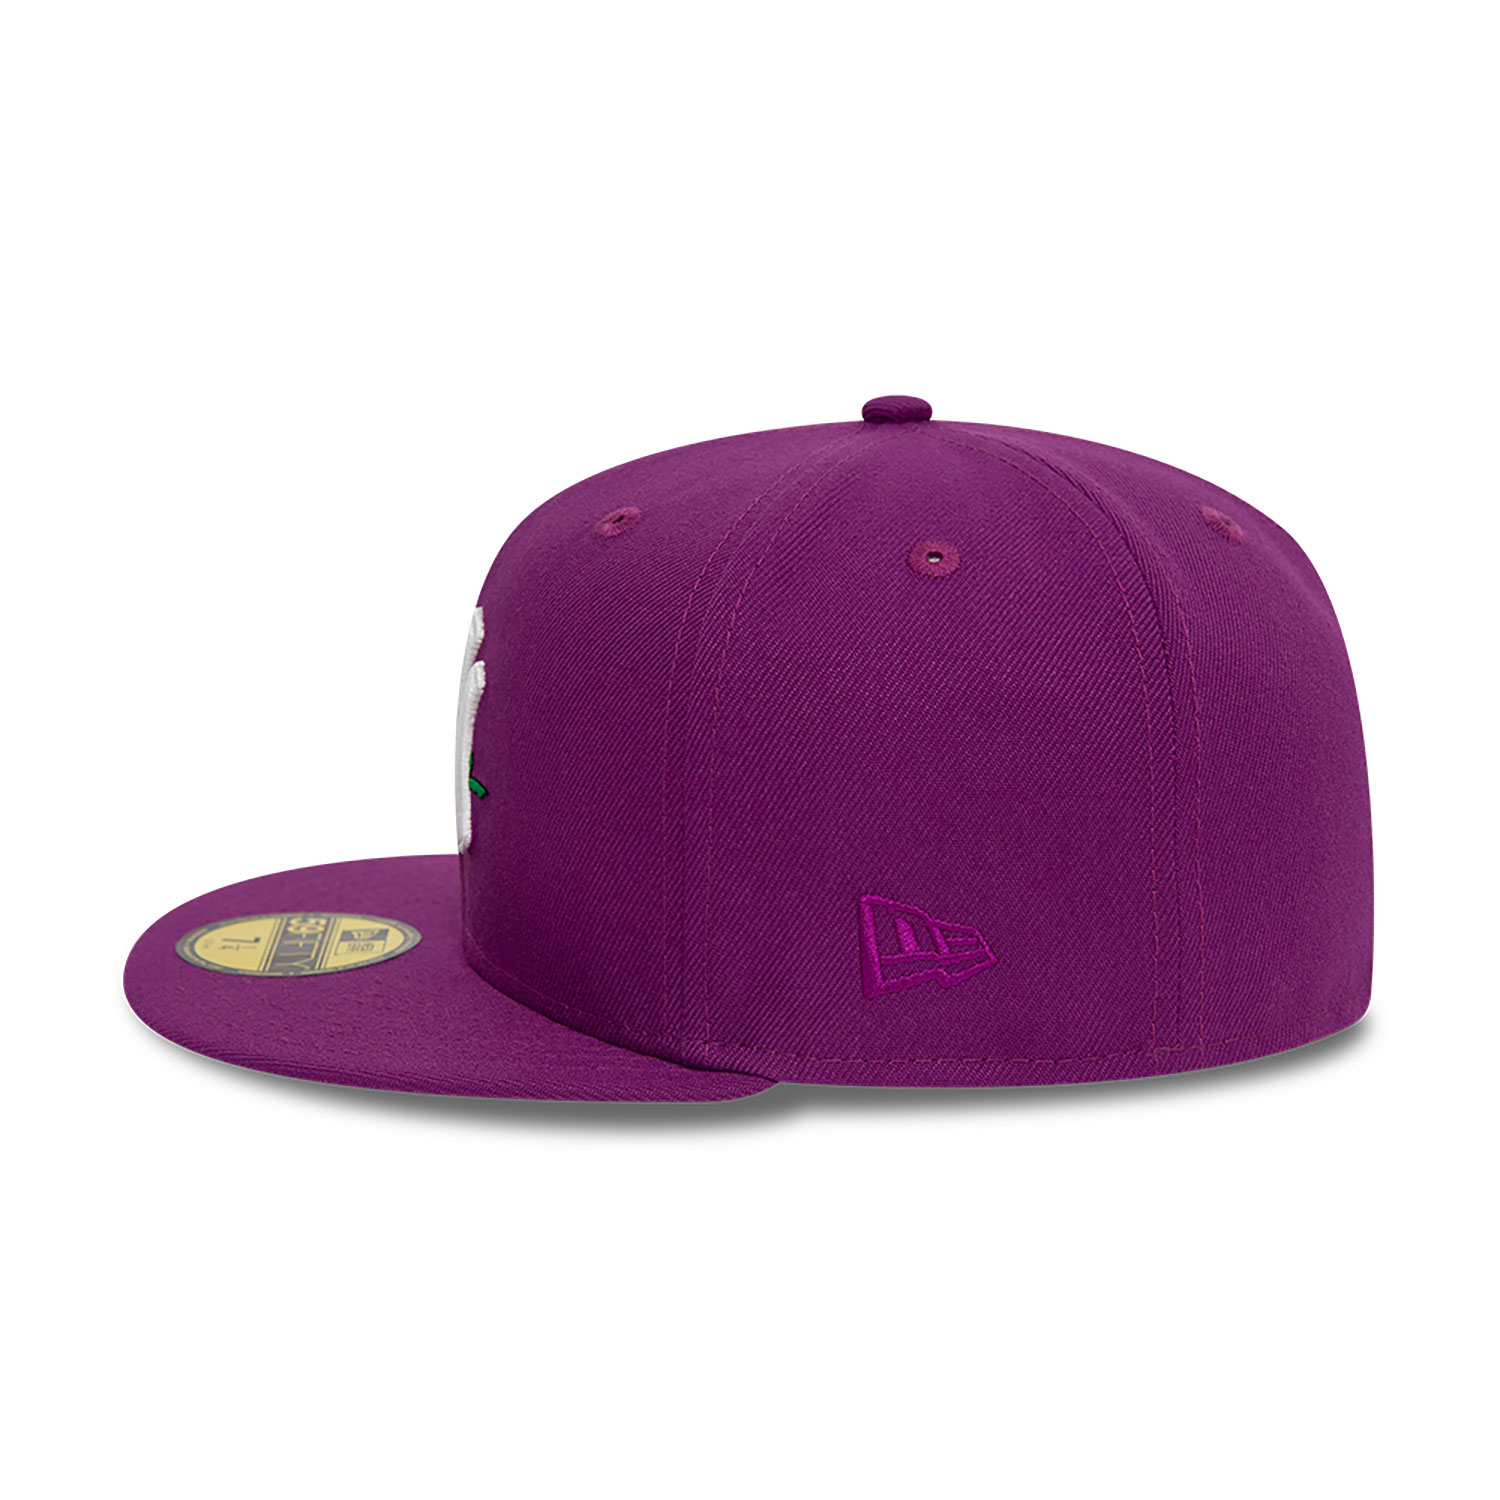 New York Yankees MLB Rose Purple 59FIFTY Fitted Cap